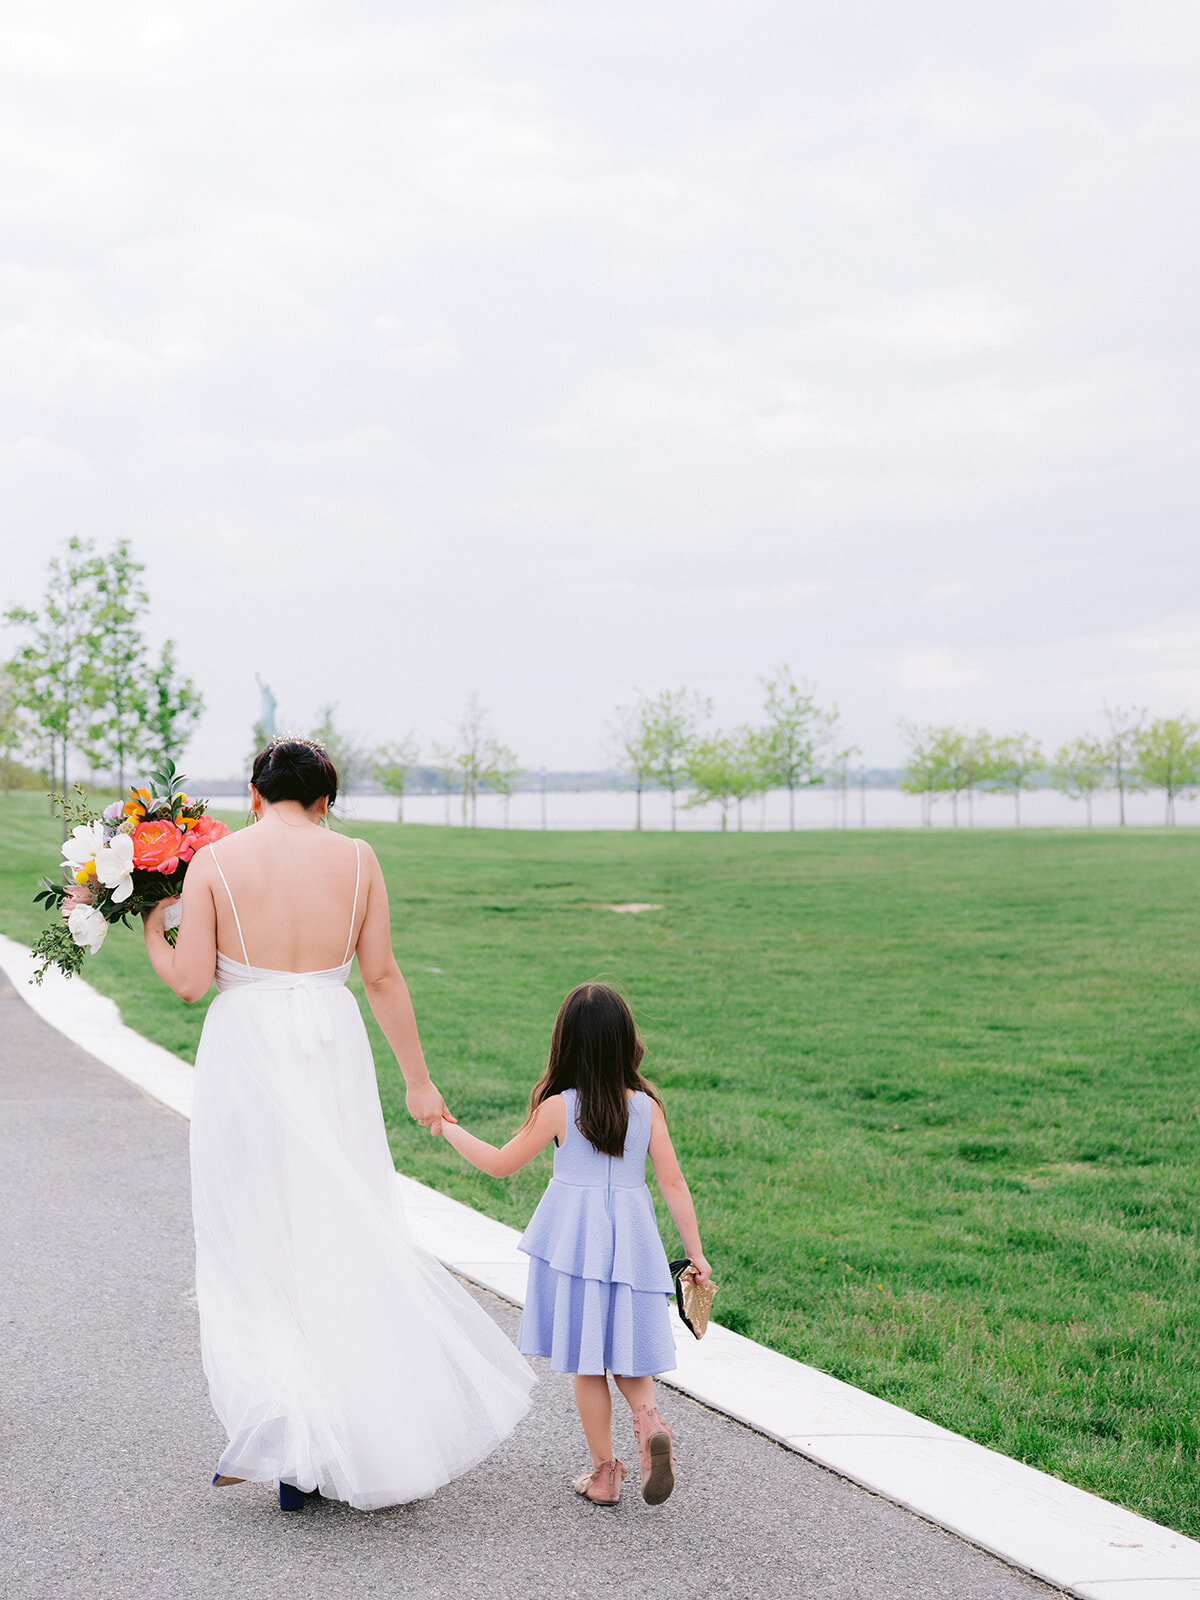 Intimate-Wedding-Ideas-in-NYC-Governors-Island-15